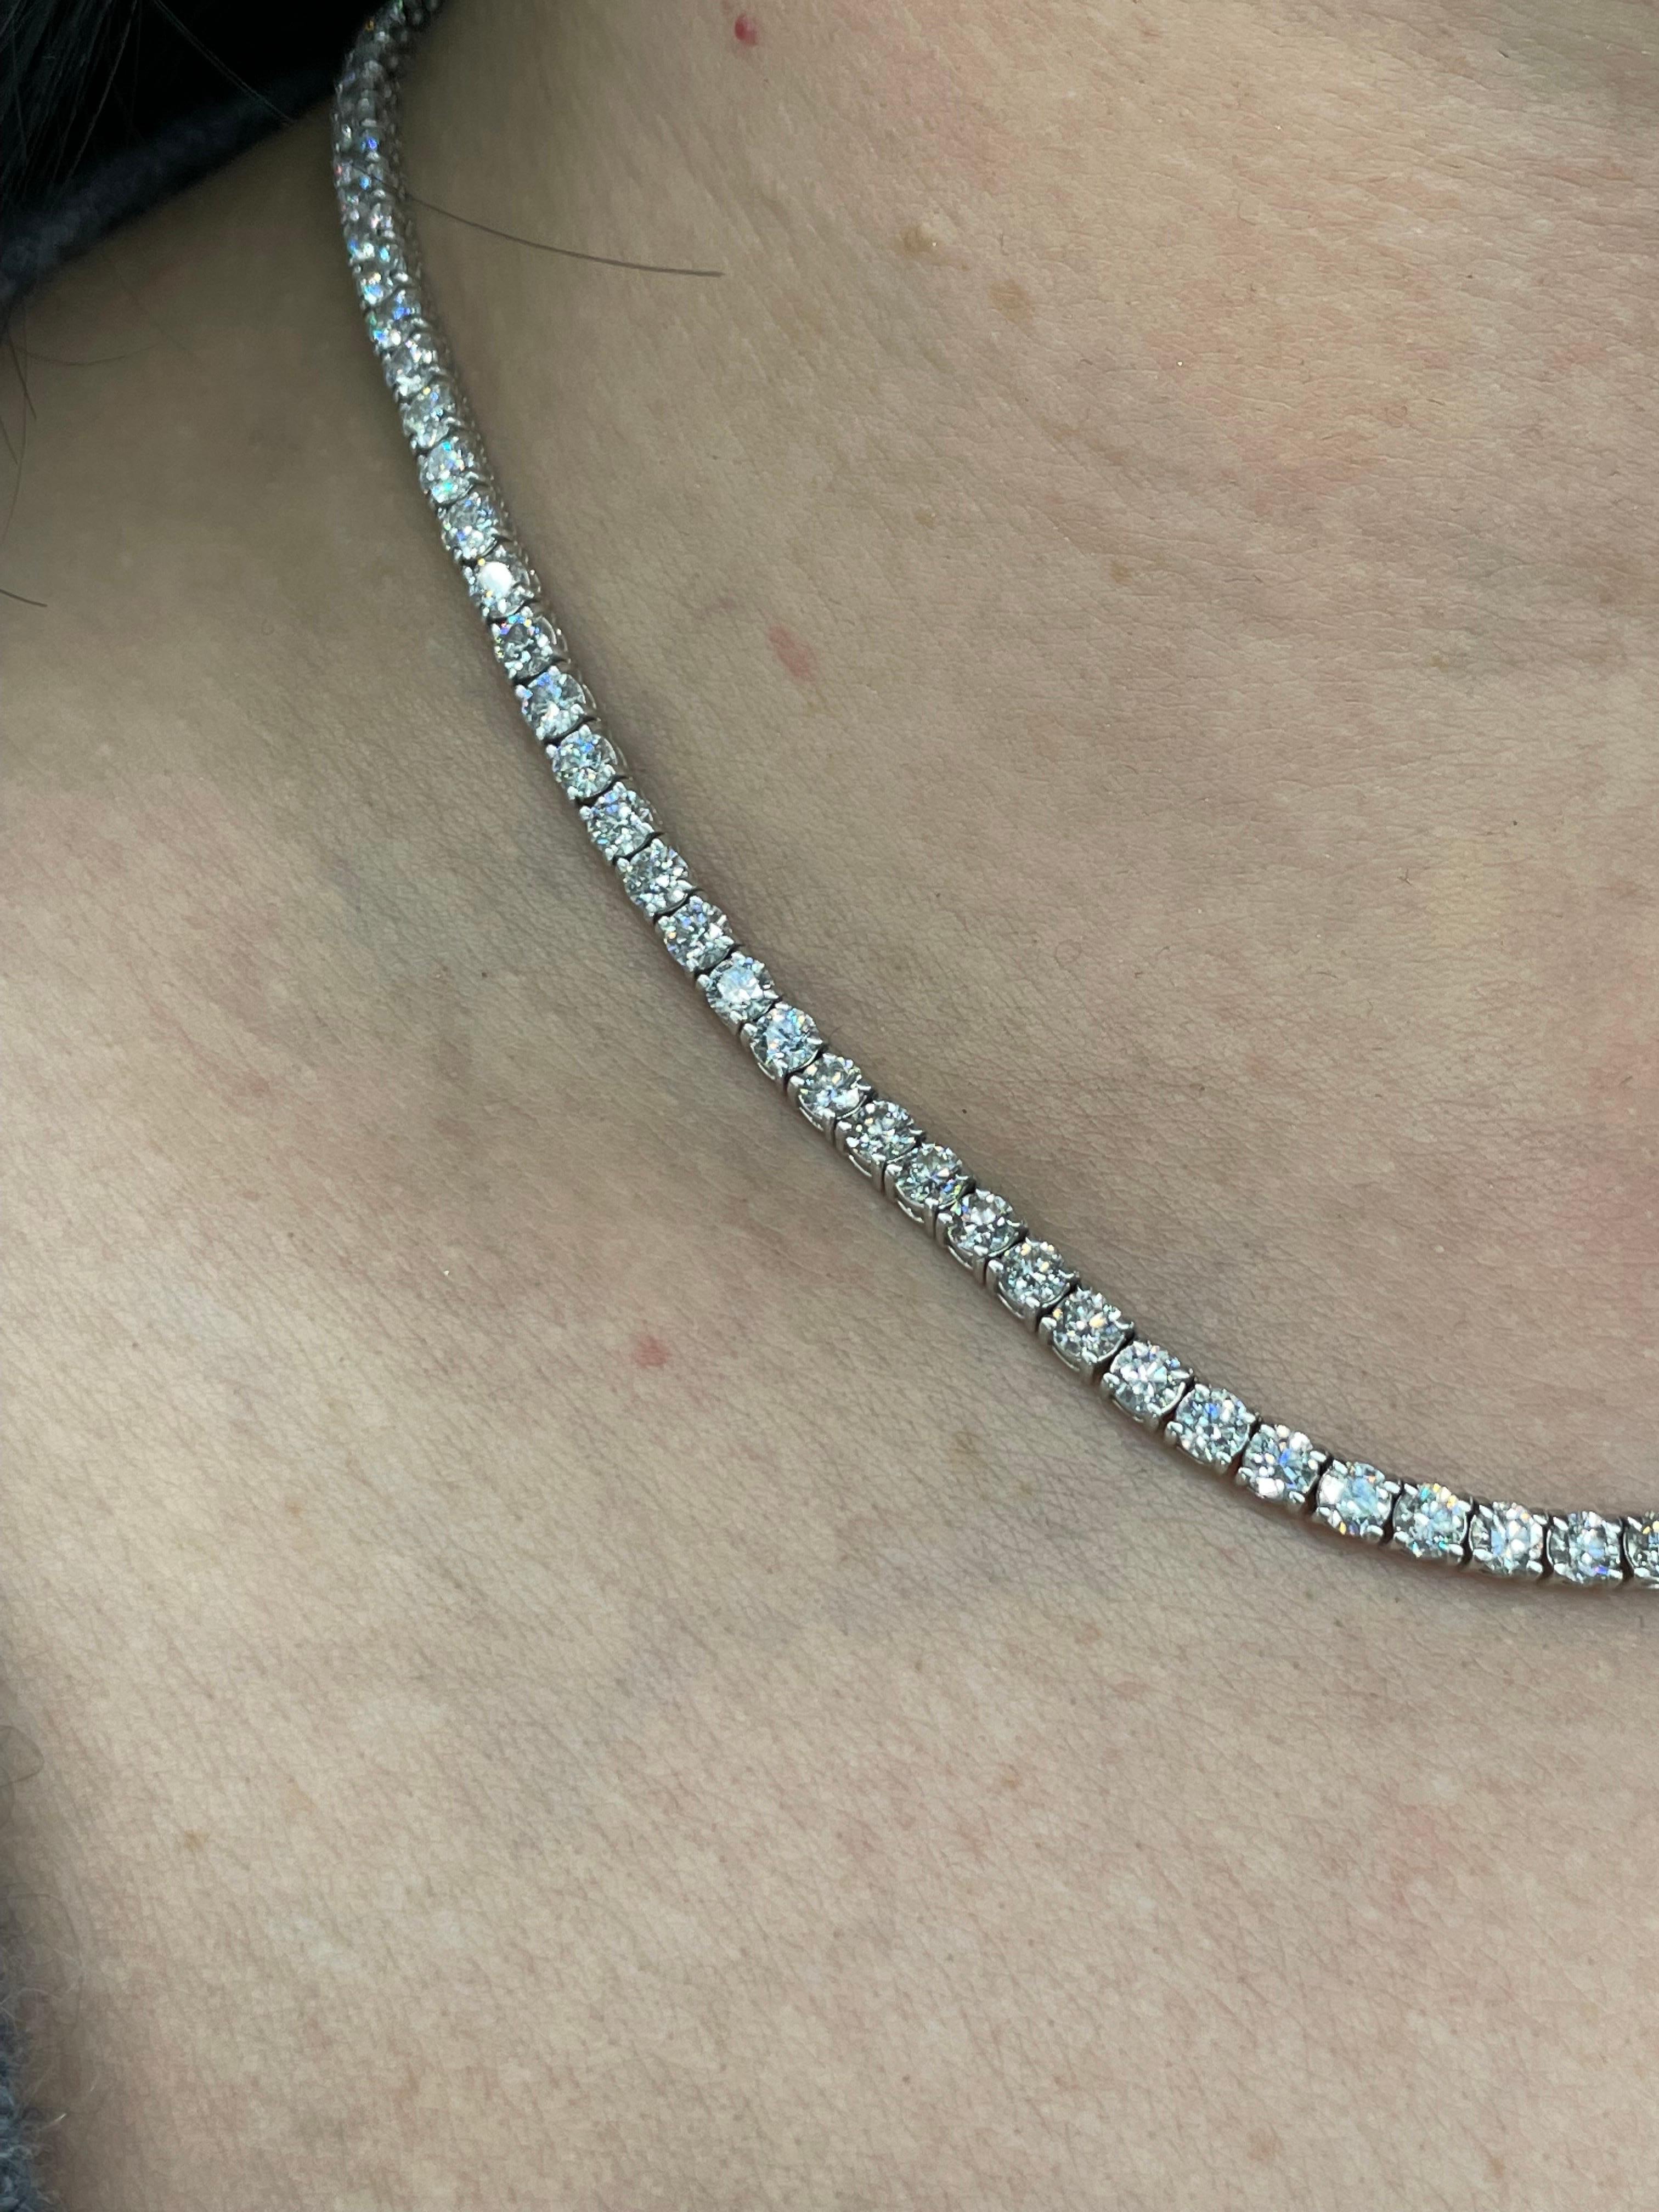 Diamonds Straight Line Necklace 17.25 Carats 14k White Gold 0.15 PTS For Sale 8